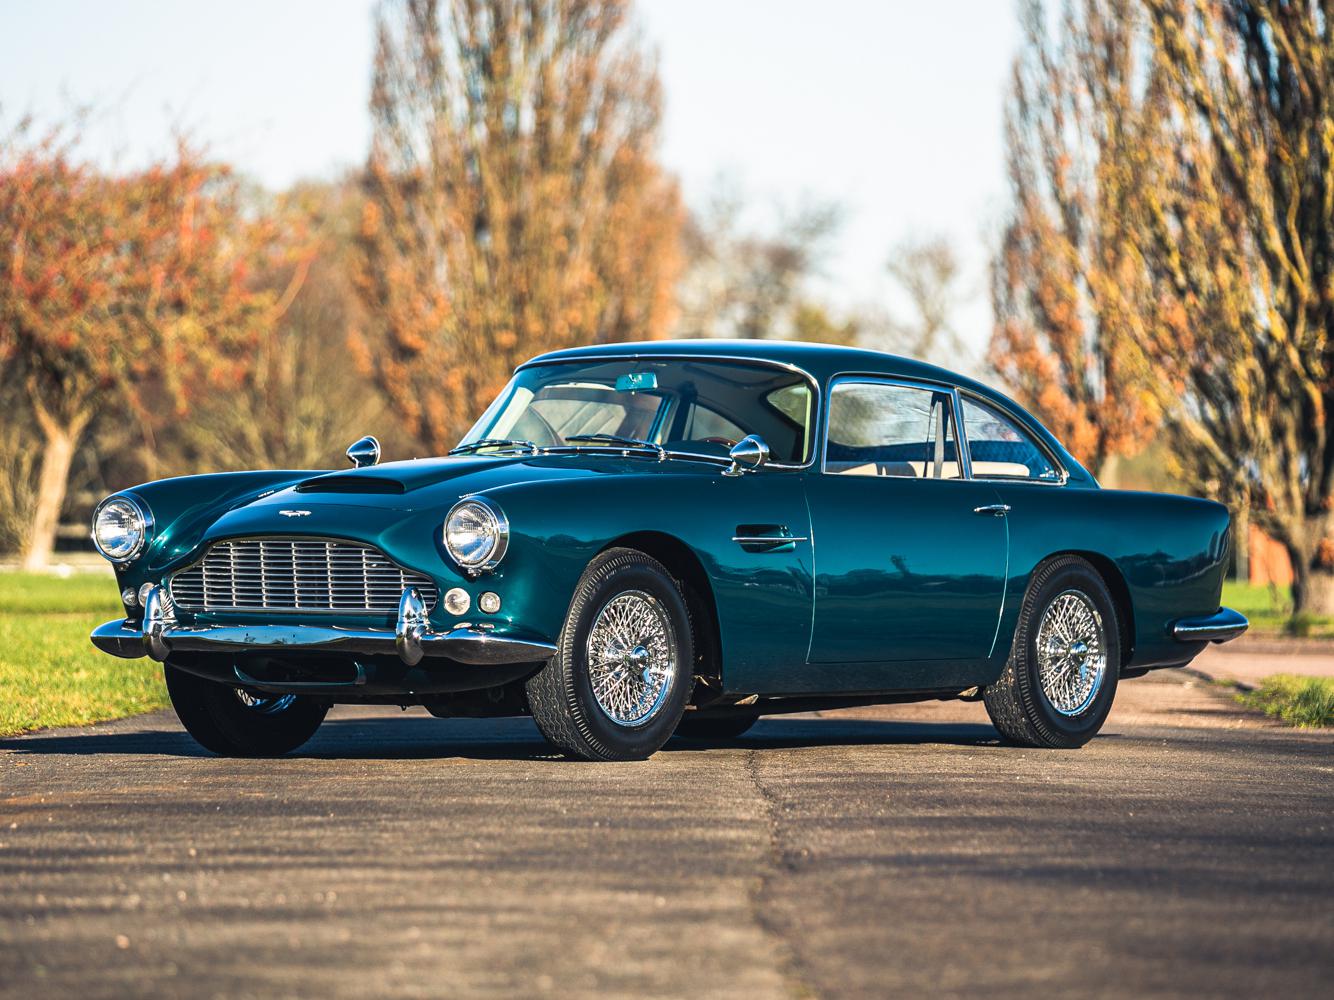 This 1963 Aston Martin DB4 Series 5 is one of one.